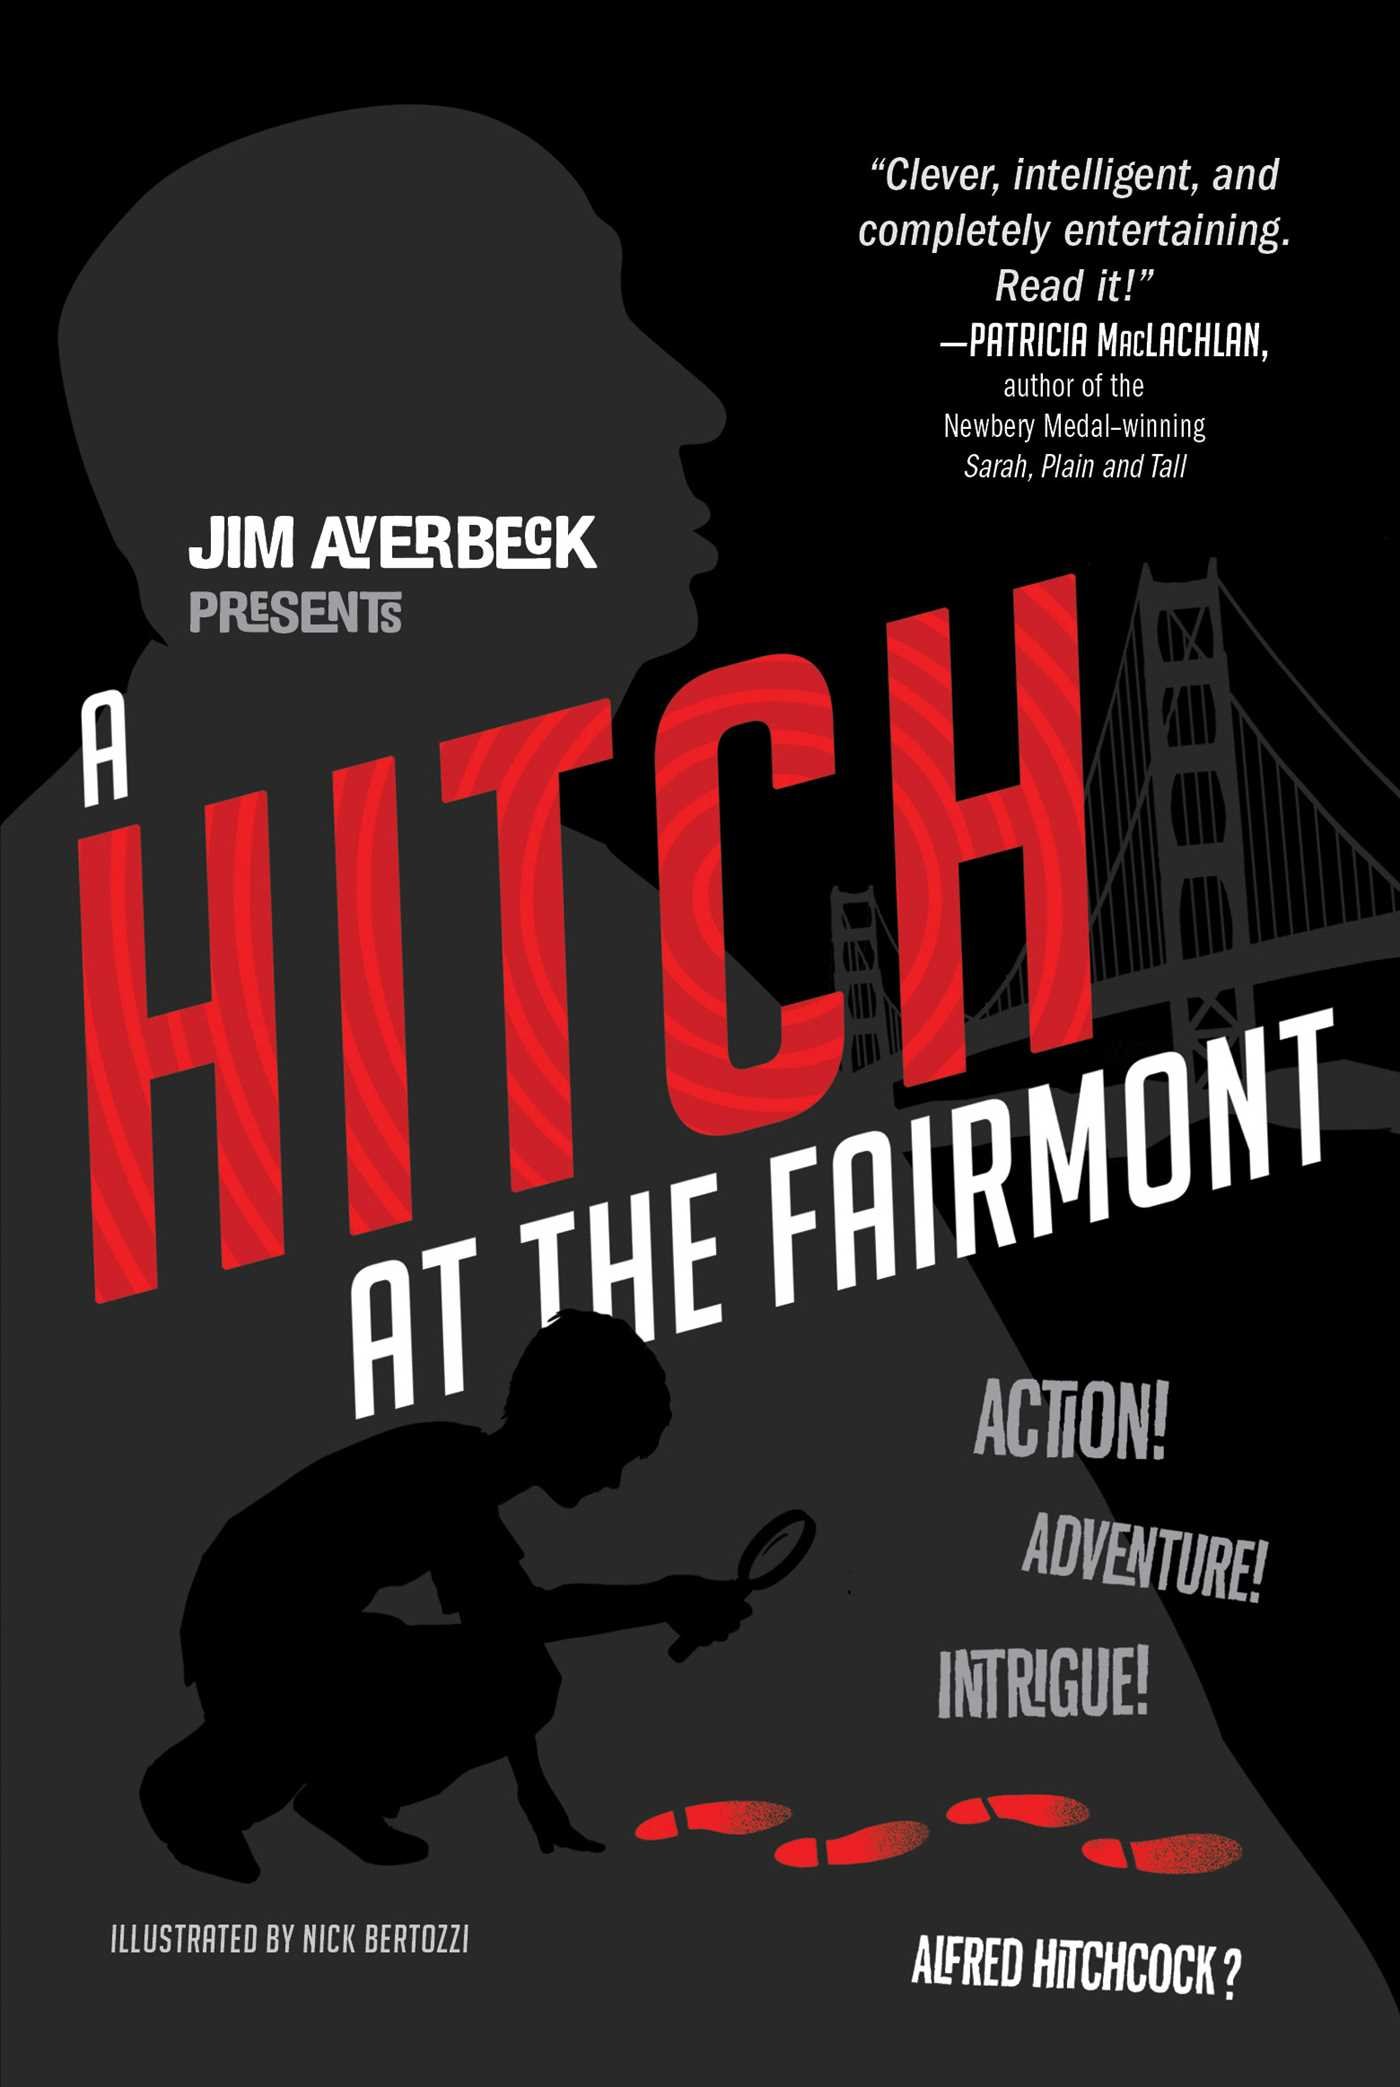 The cover image of A Hitch at the Fairmont, which is shades of black and grey and red accents. There is the distant silhouette of Hitchcock and a closer silhouette of a boy examining red footprints with a magnifying glass.